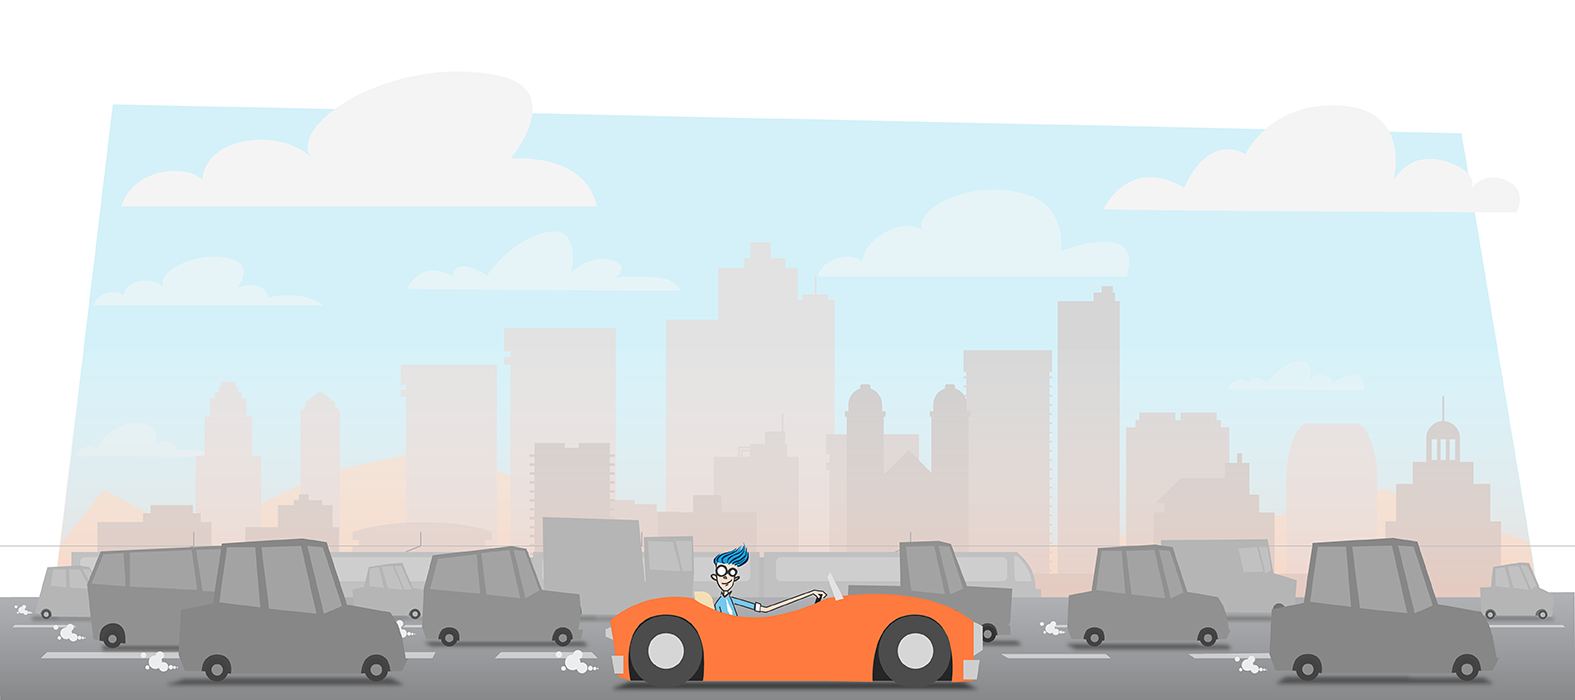 Branding service illustration, grey city background. Diesel character in a hover craft above cars.